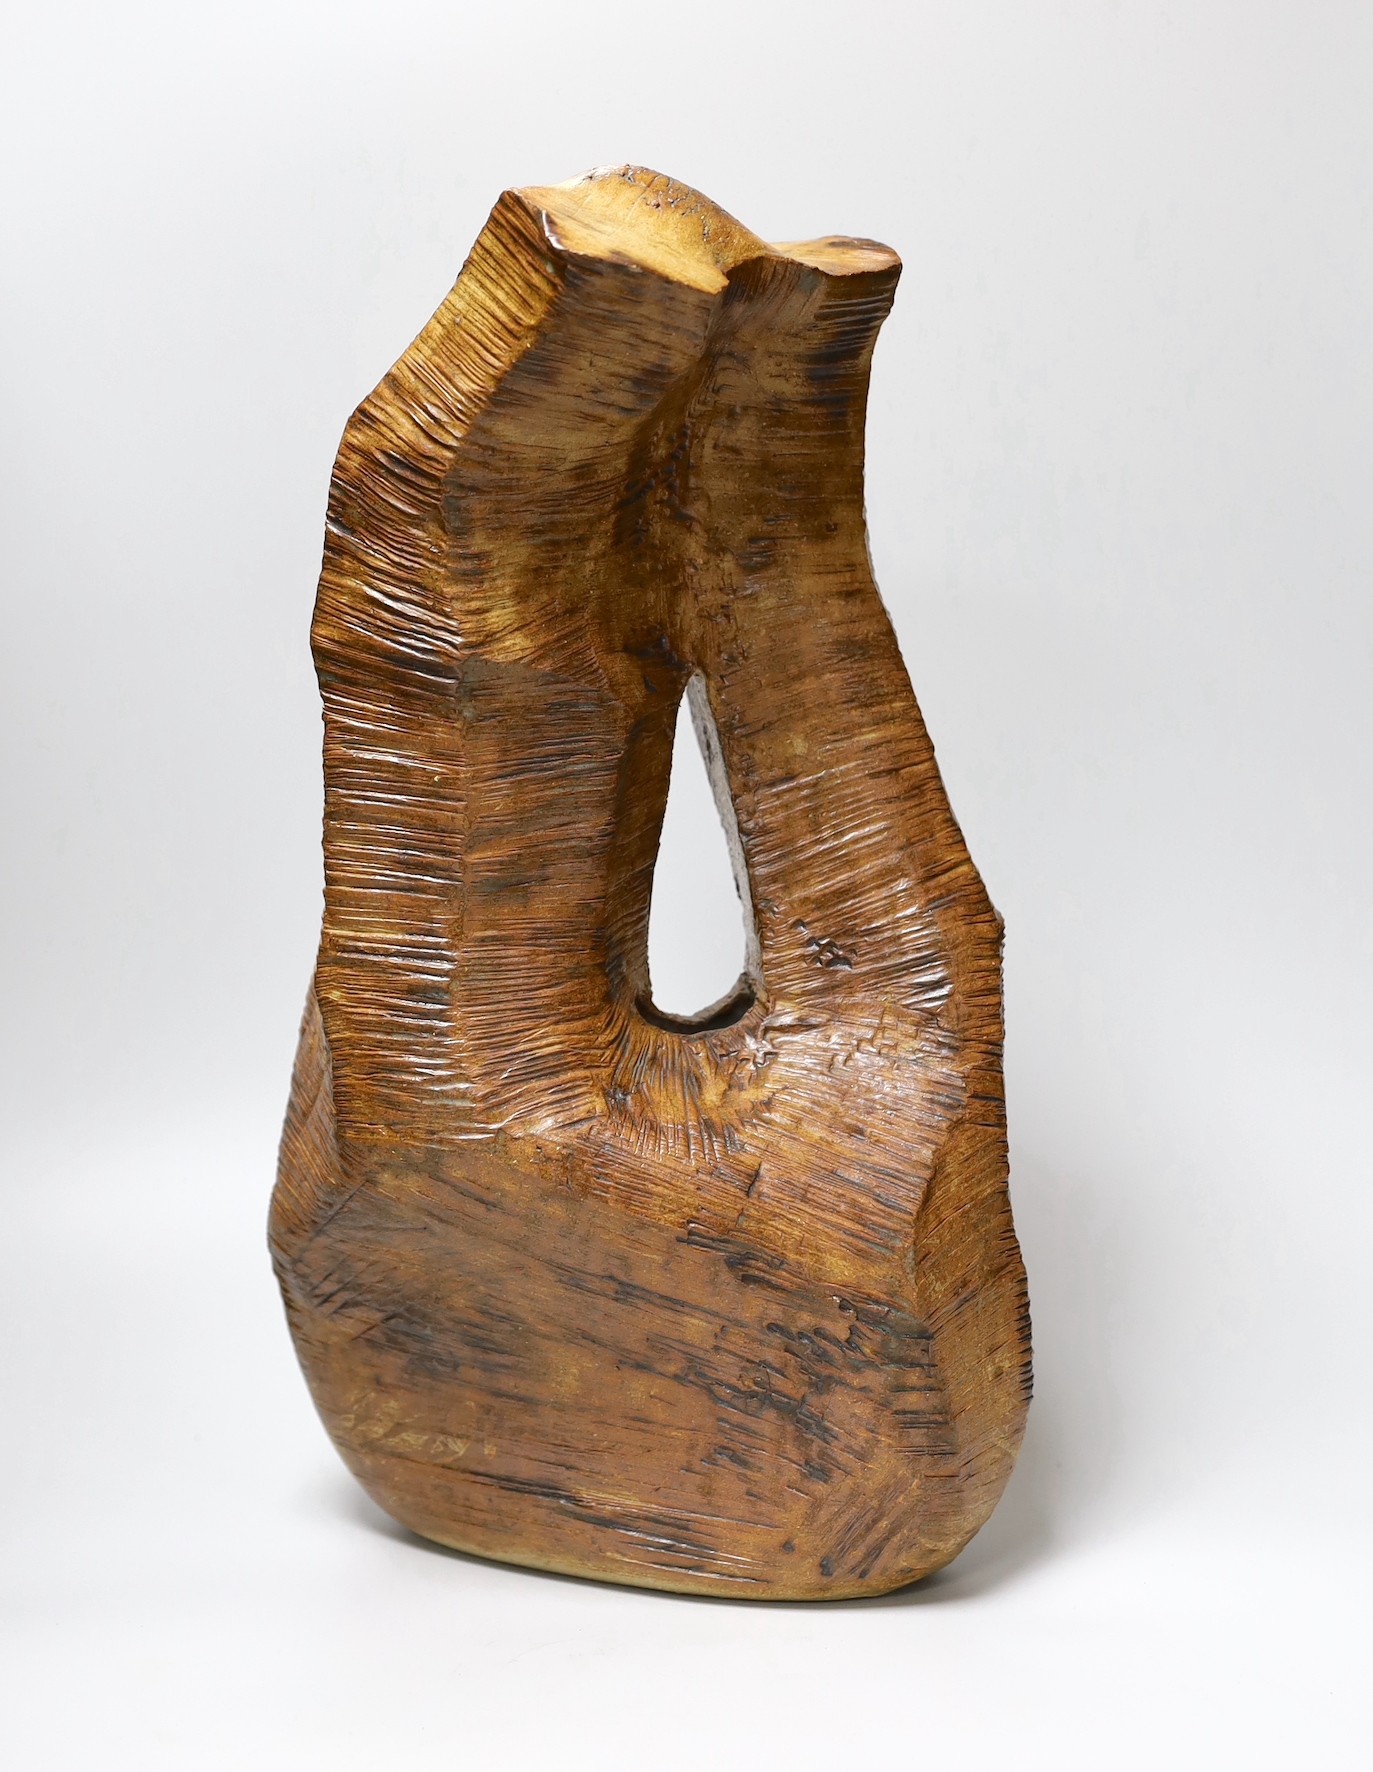 Ruth Sulke - a large brown copper glazed stoneware angular “wooden” sculpture with central hole, - Image 2 of 4